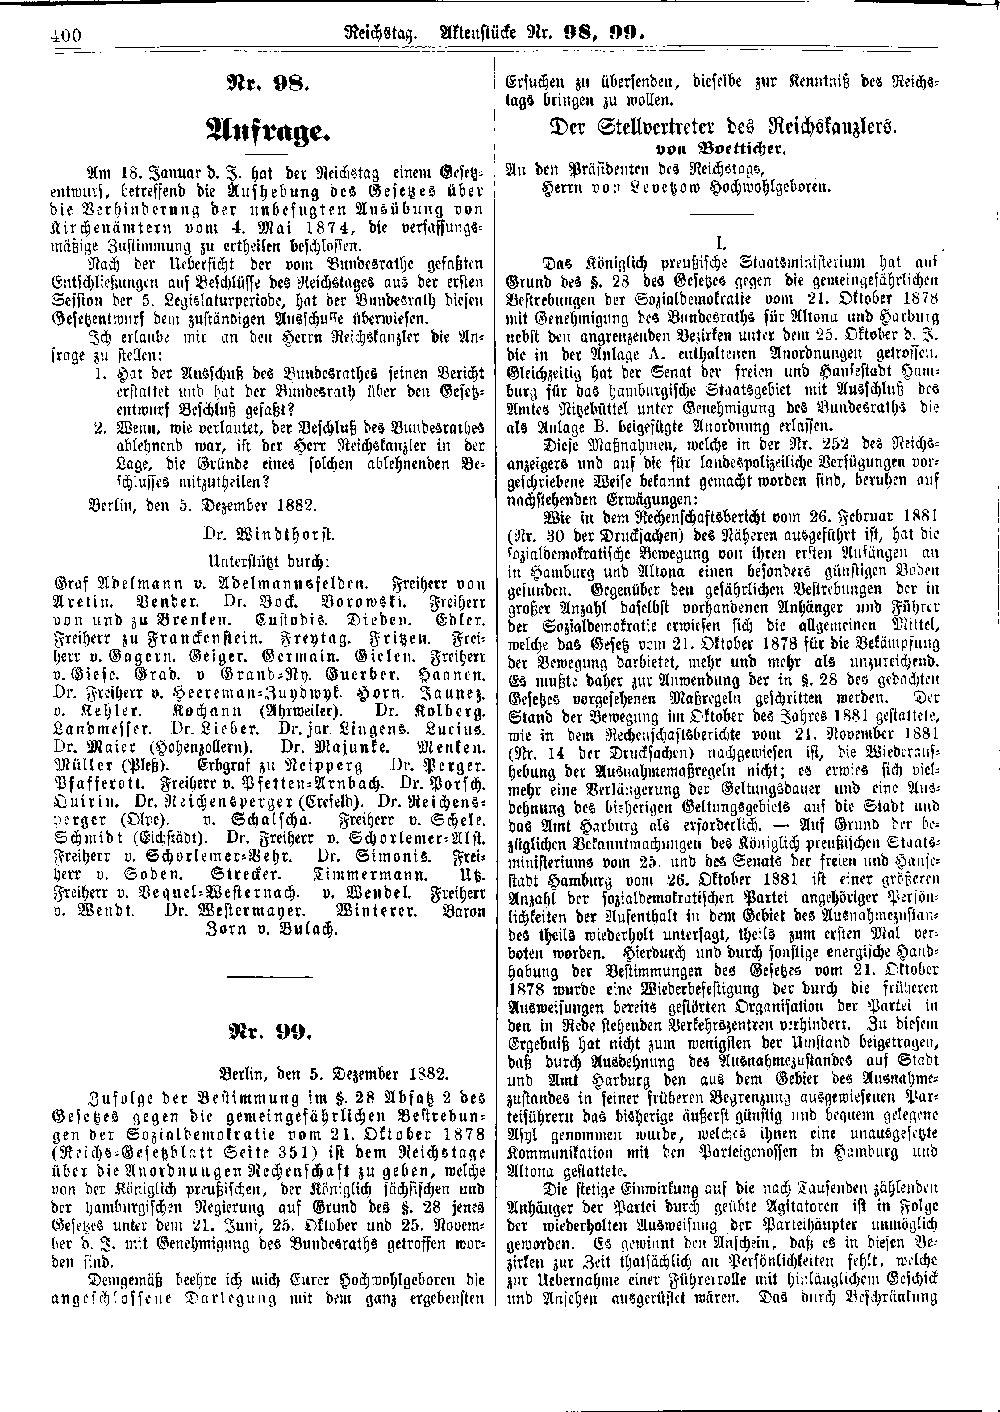 Scan of page 400